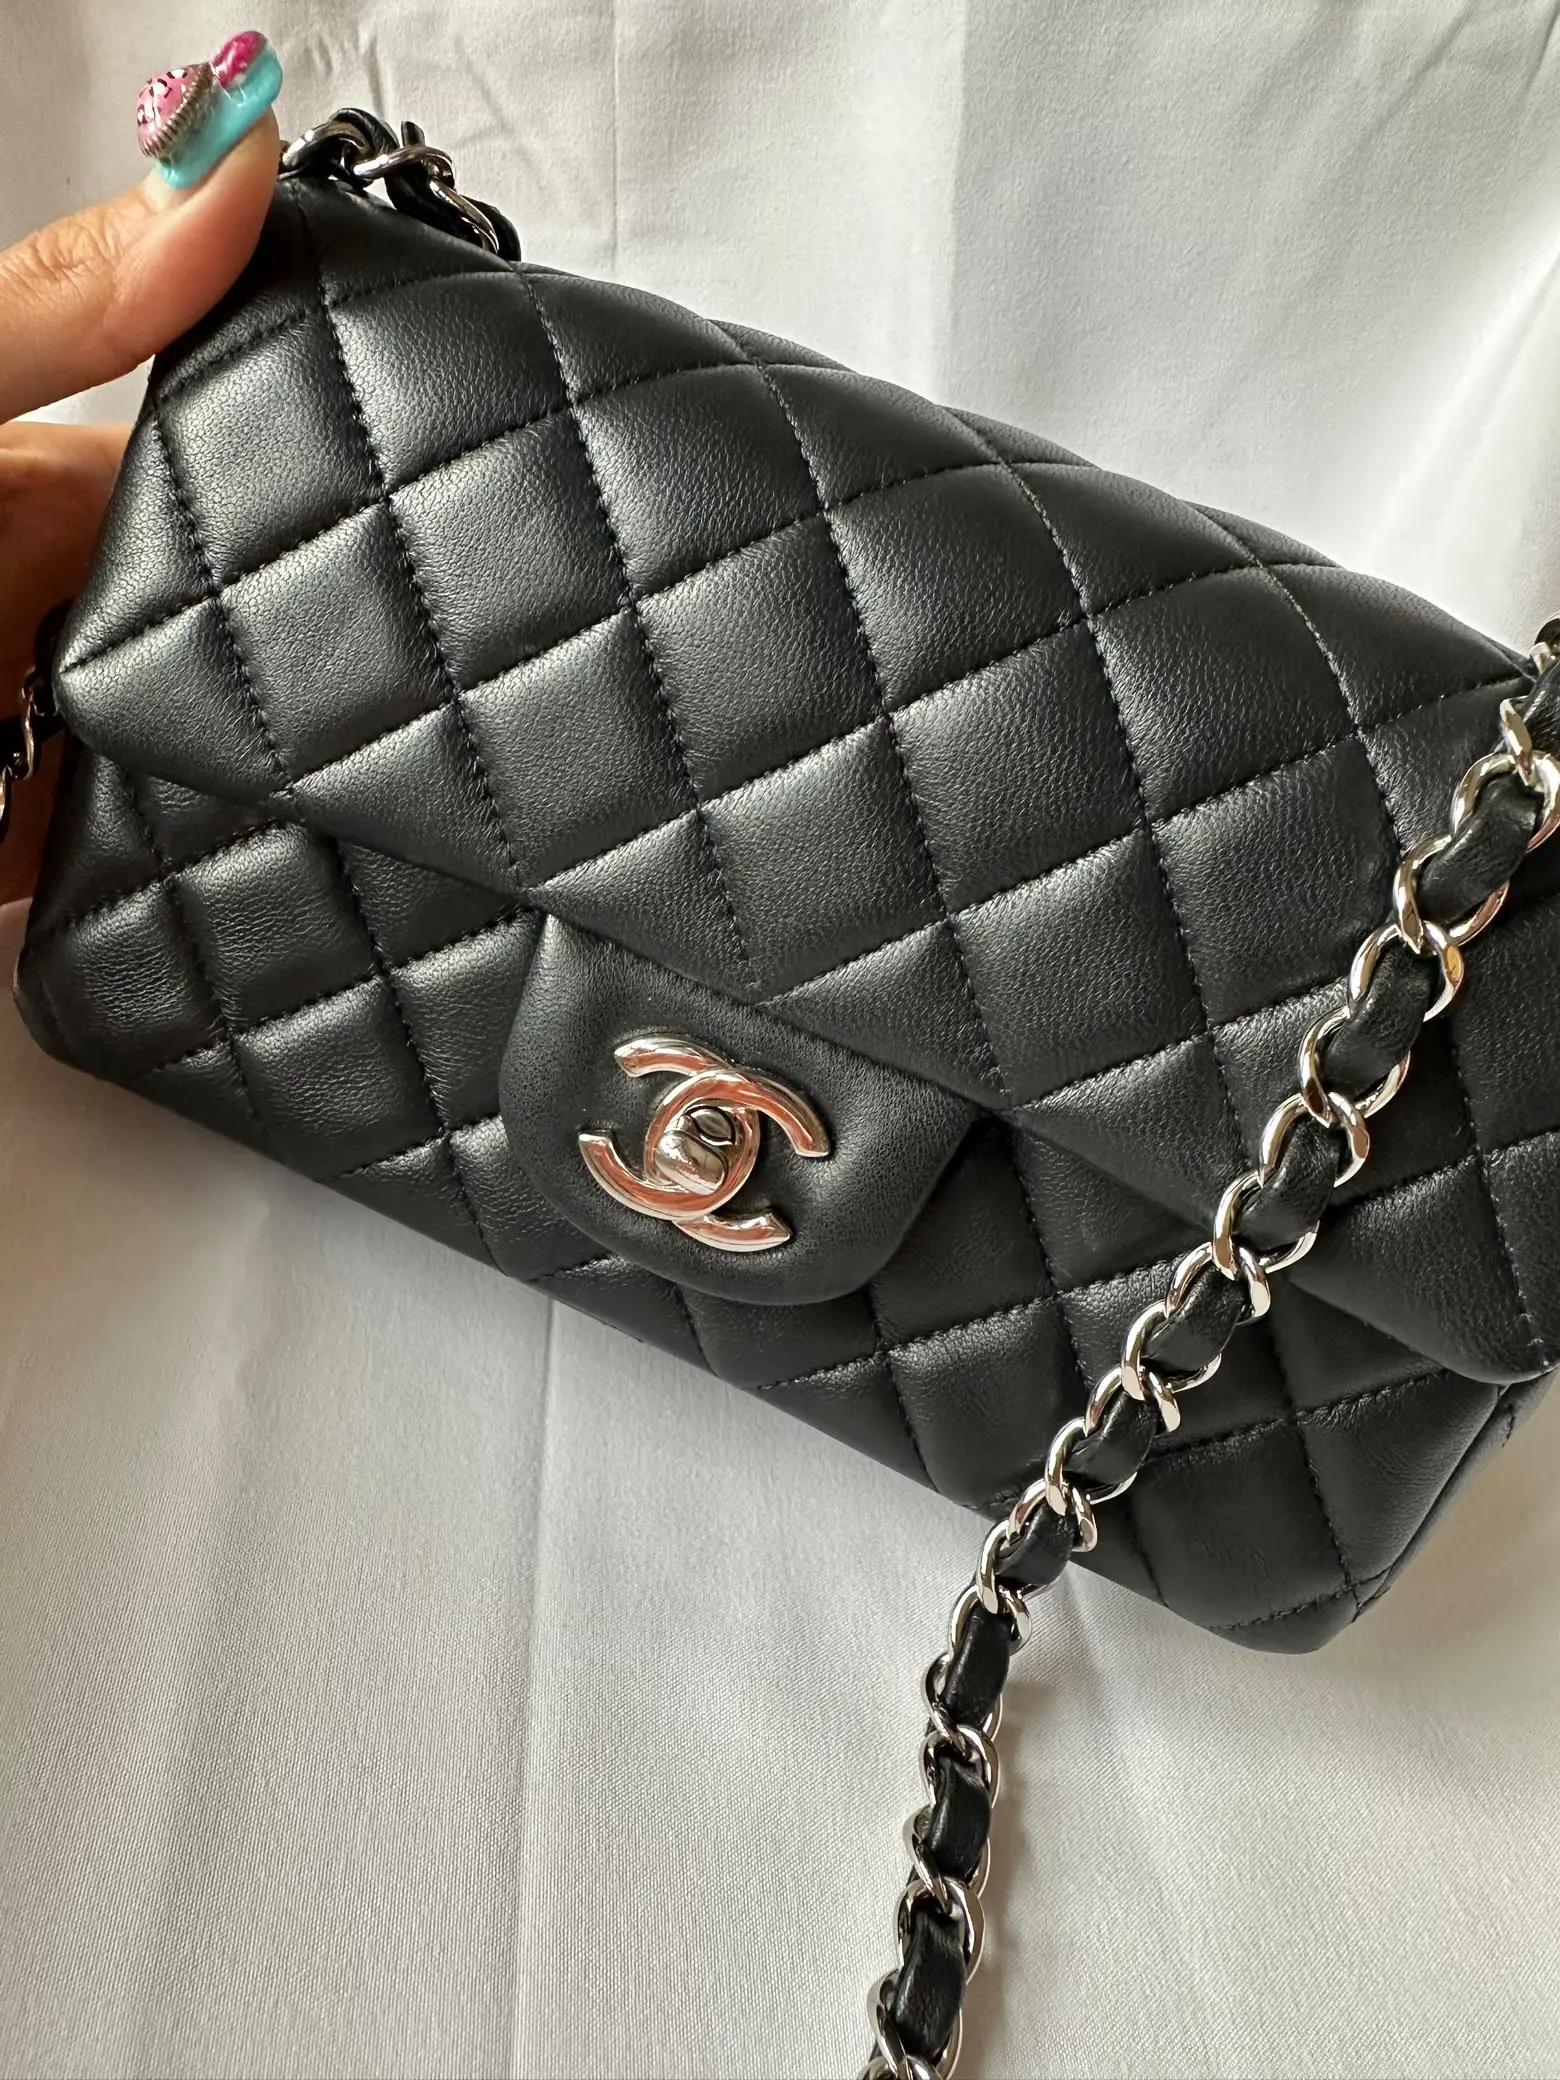 Should the CHANEL classic 8 bag be pounded? How?🖤